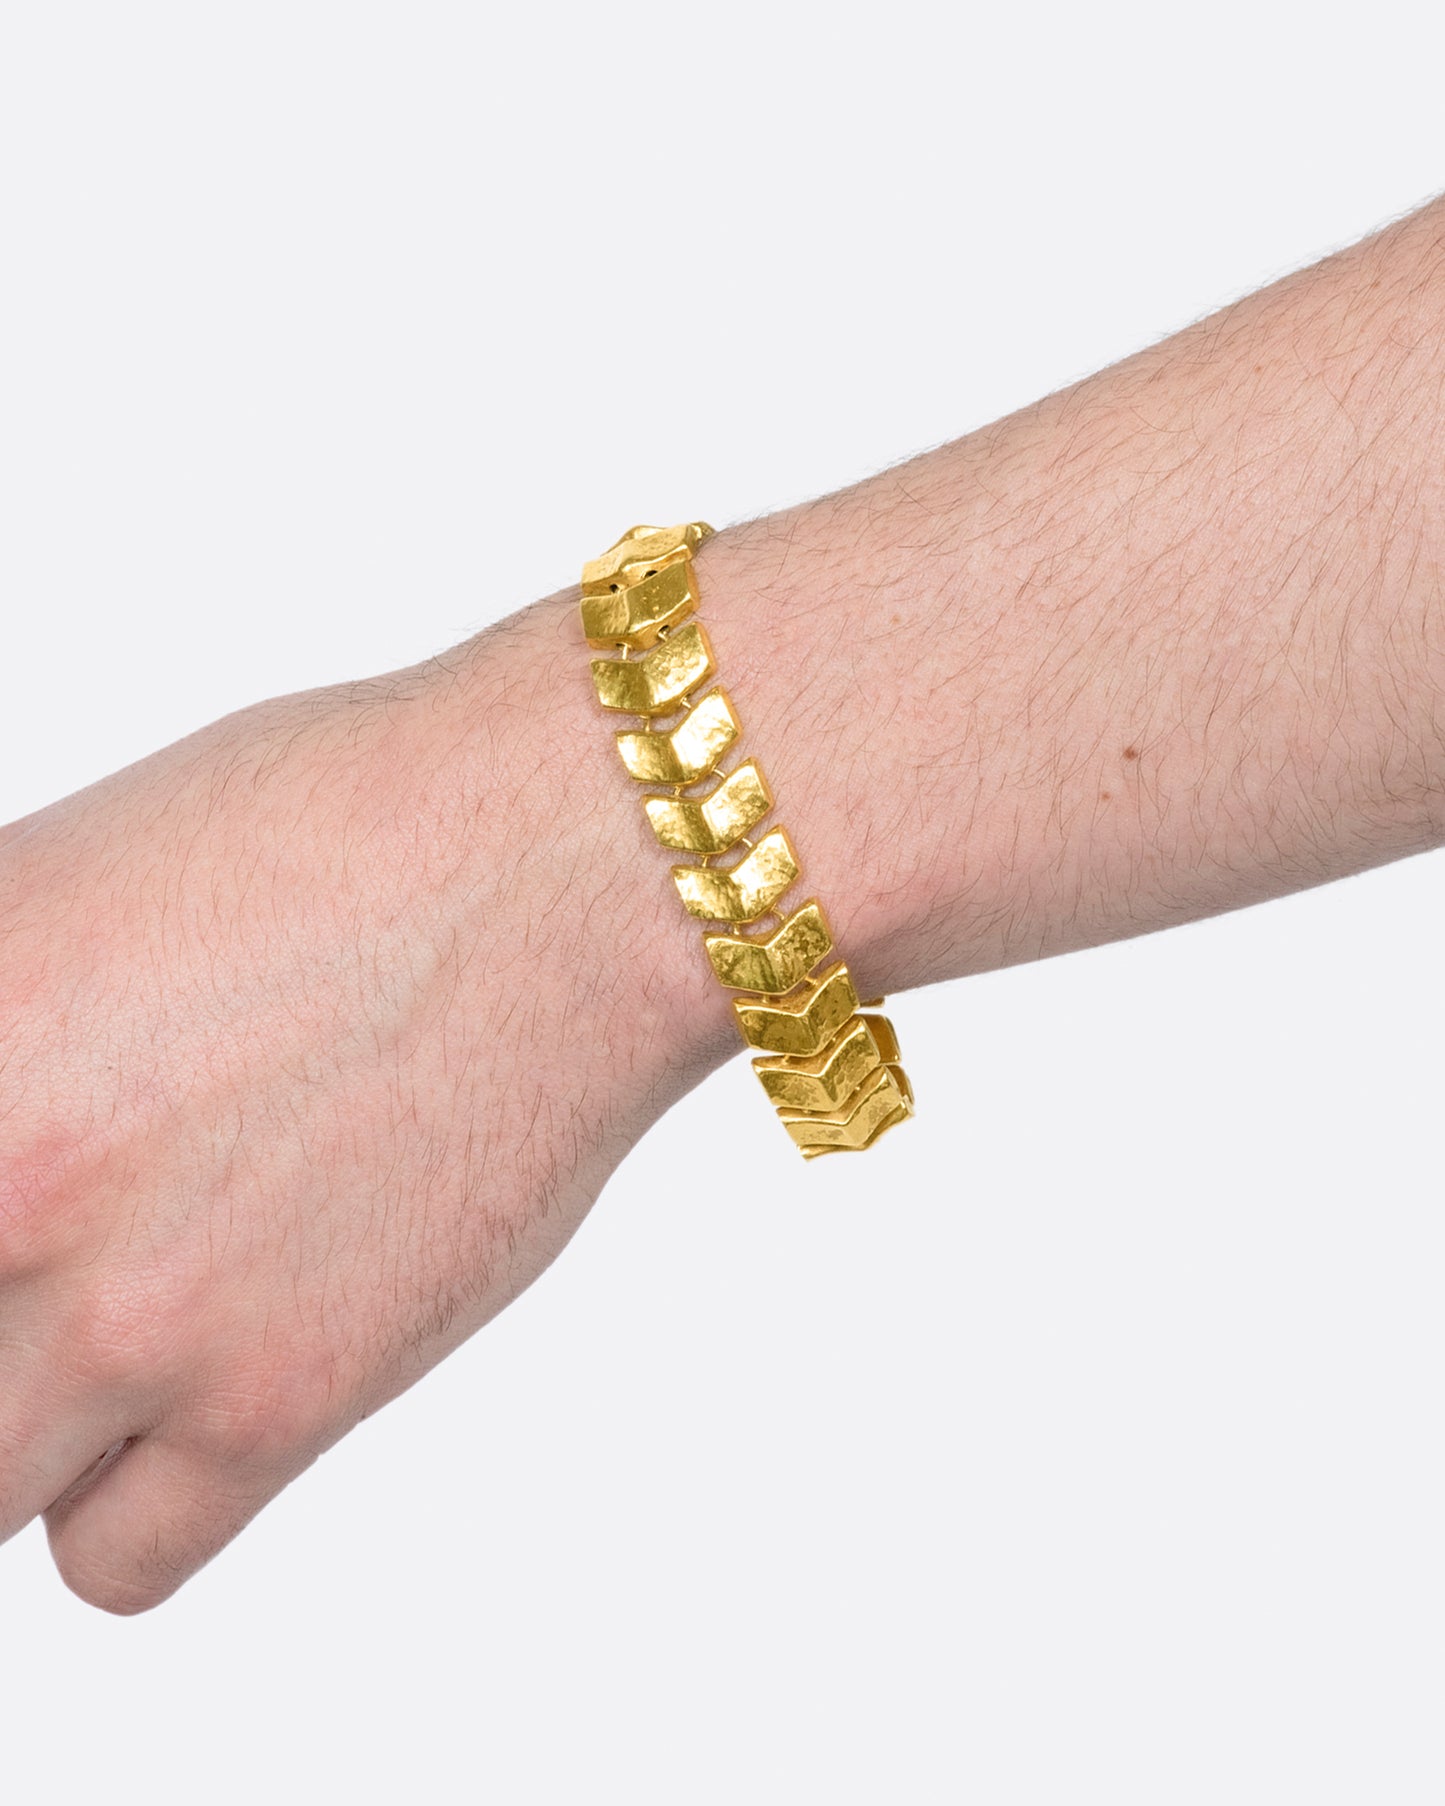 Made from buttery, high karat gold, the links on this bracelet are both substantial in size and in impact.